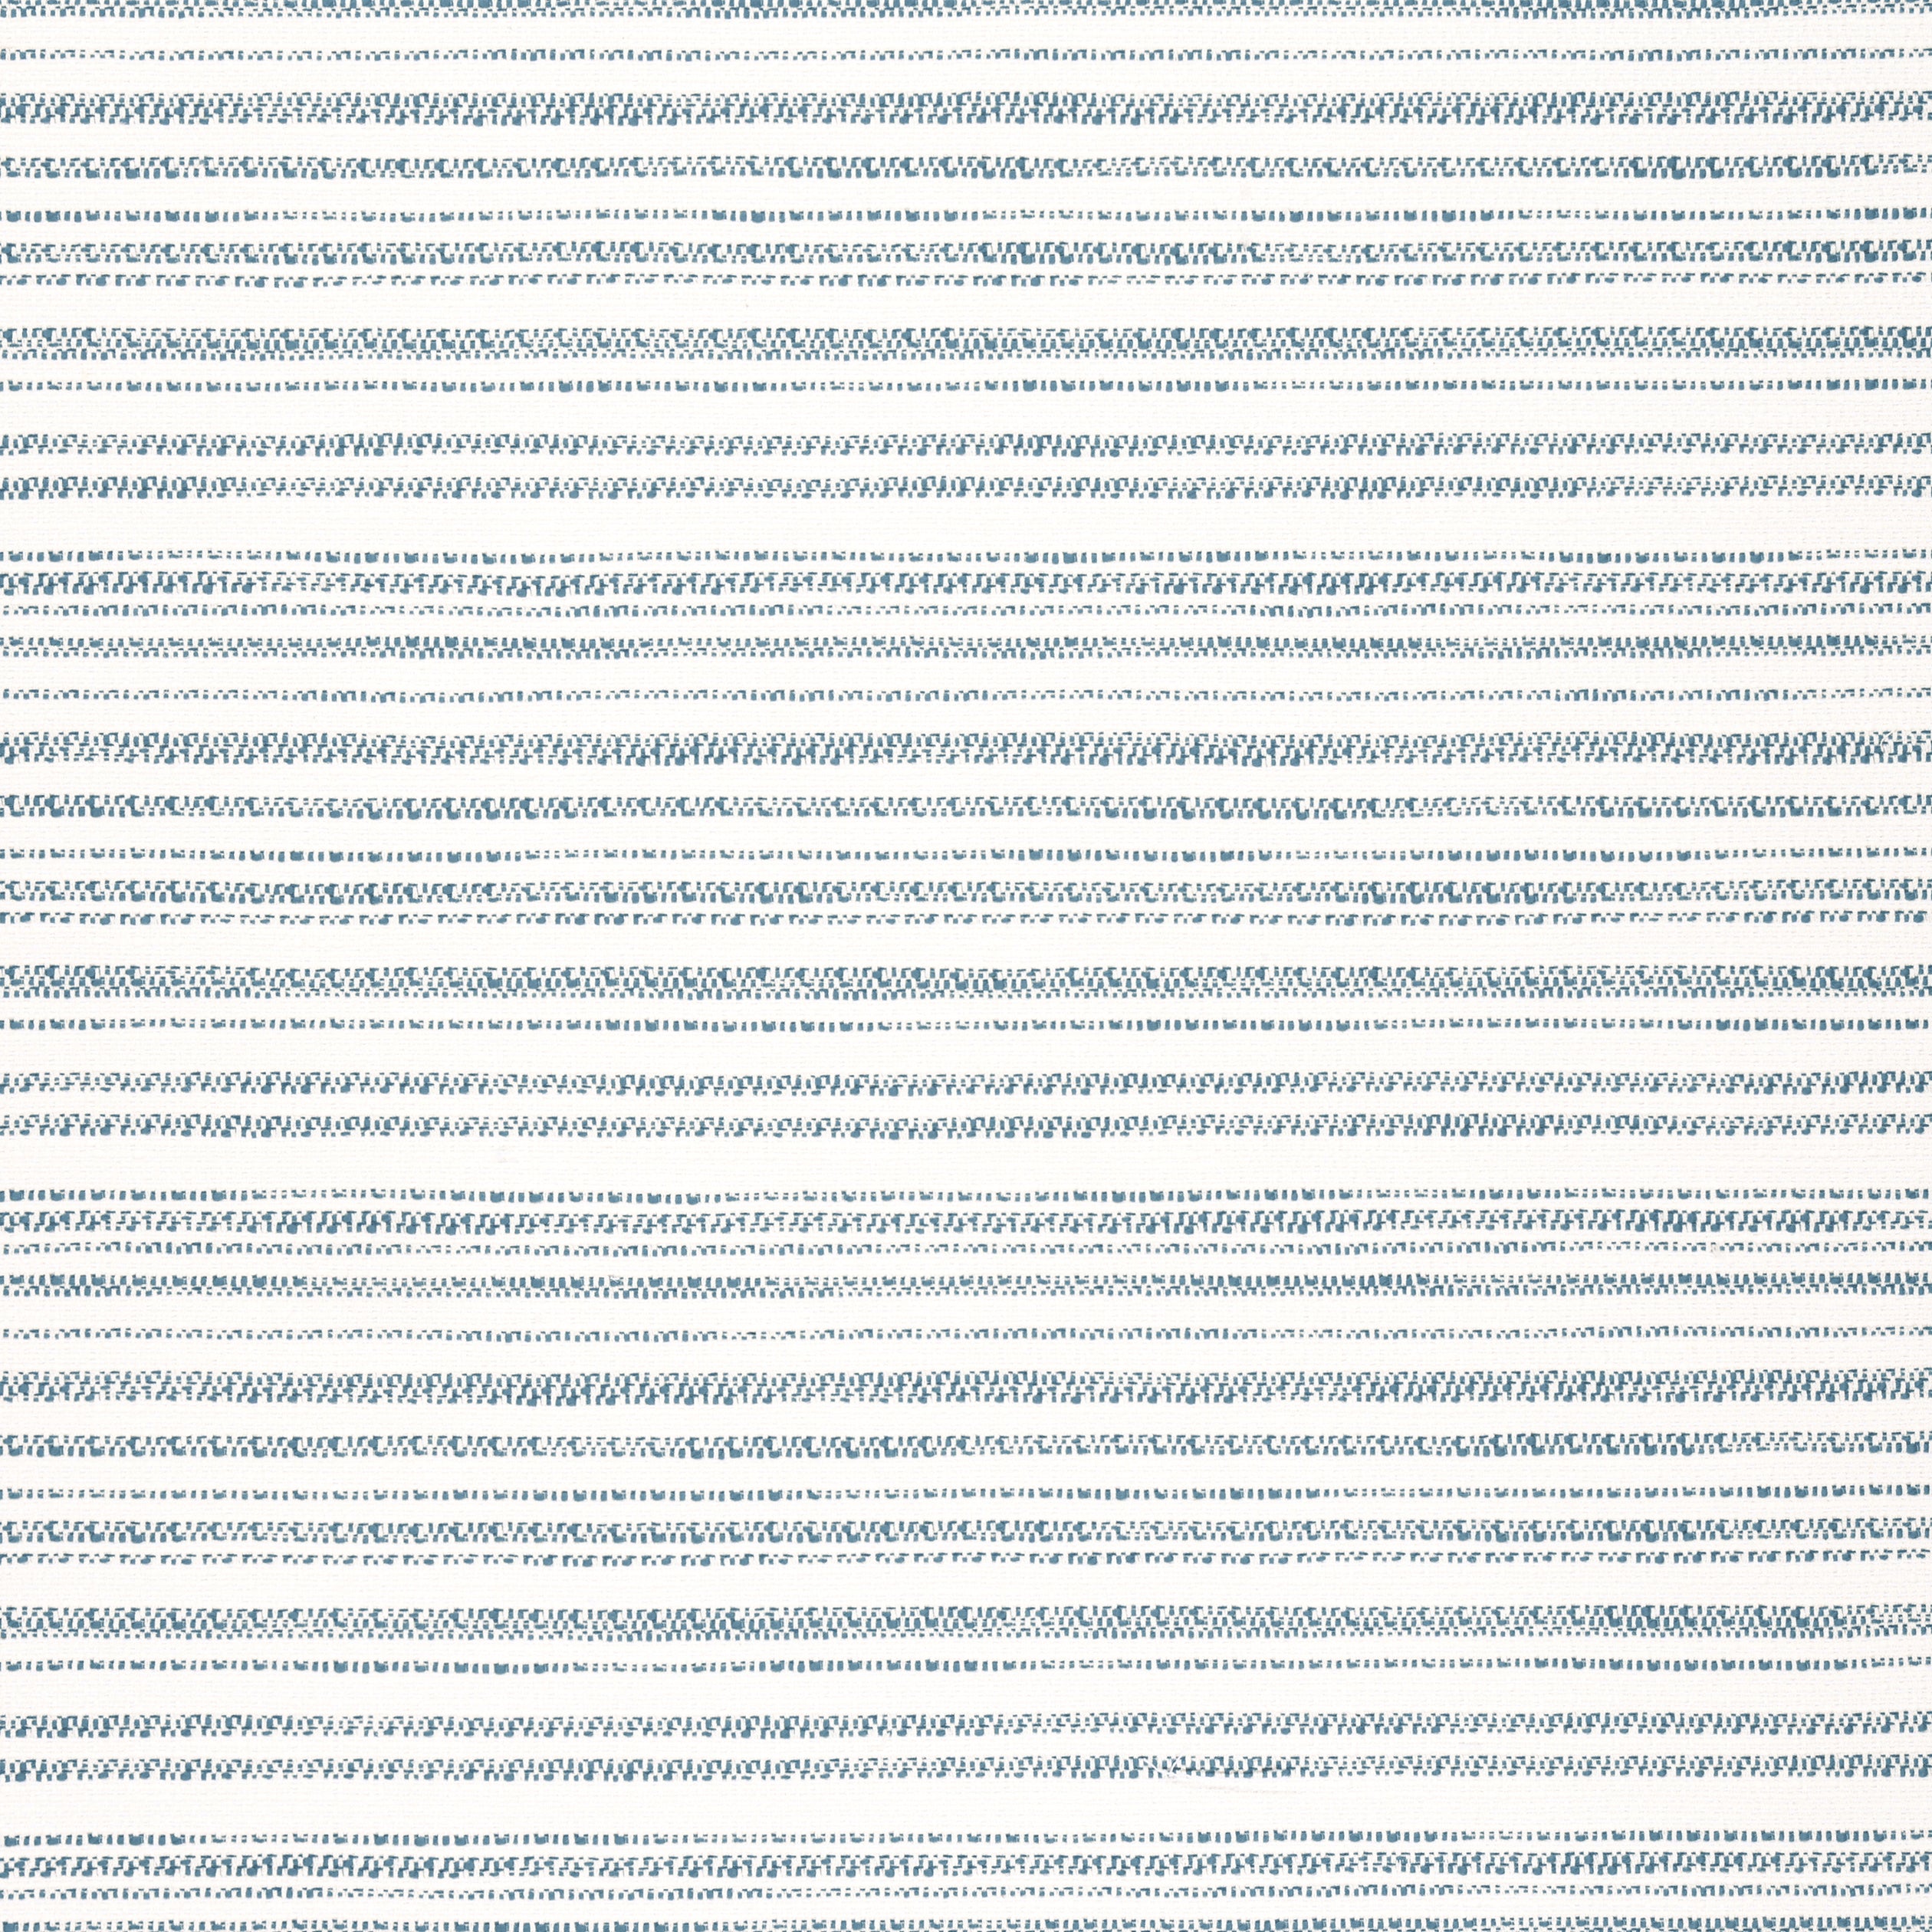 Bellano Stripe fabric in ocean color - pattern number W77152 - by Thibaut in the Veneto collection